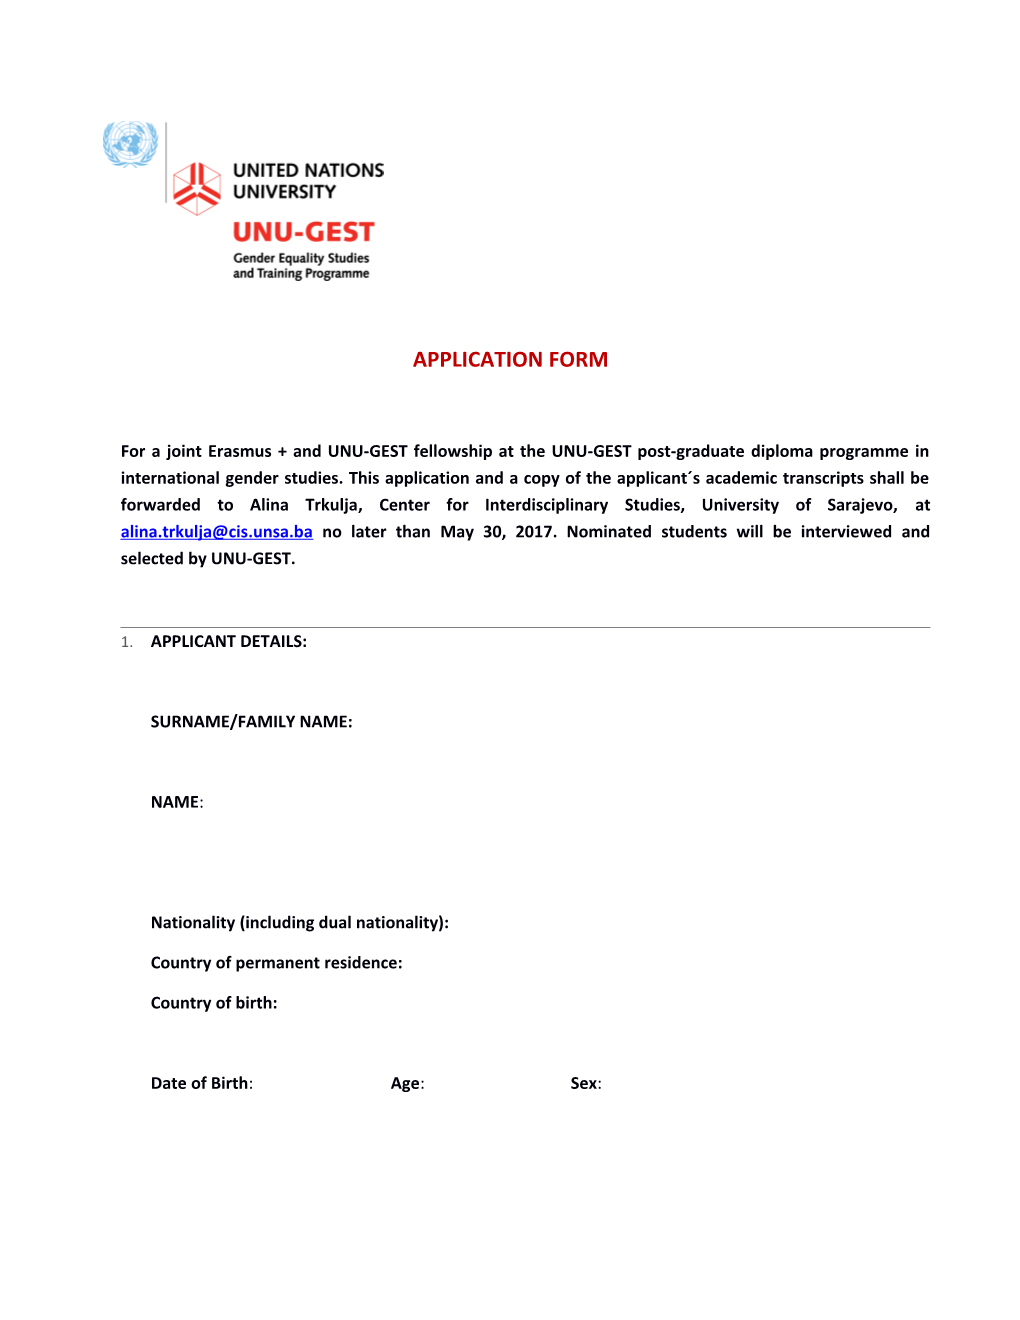 Application Form s19